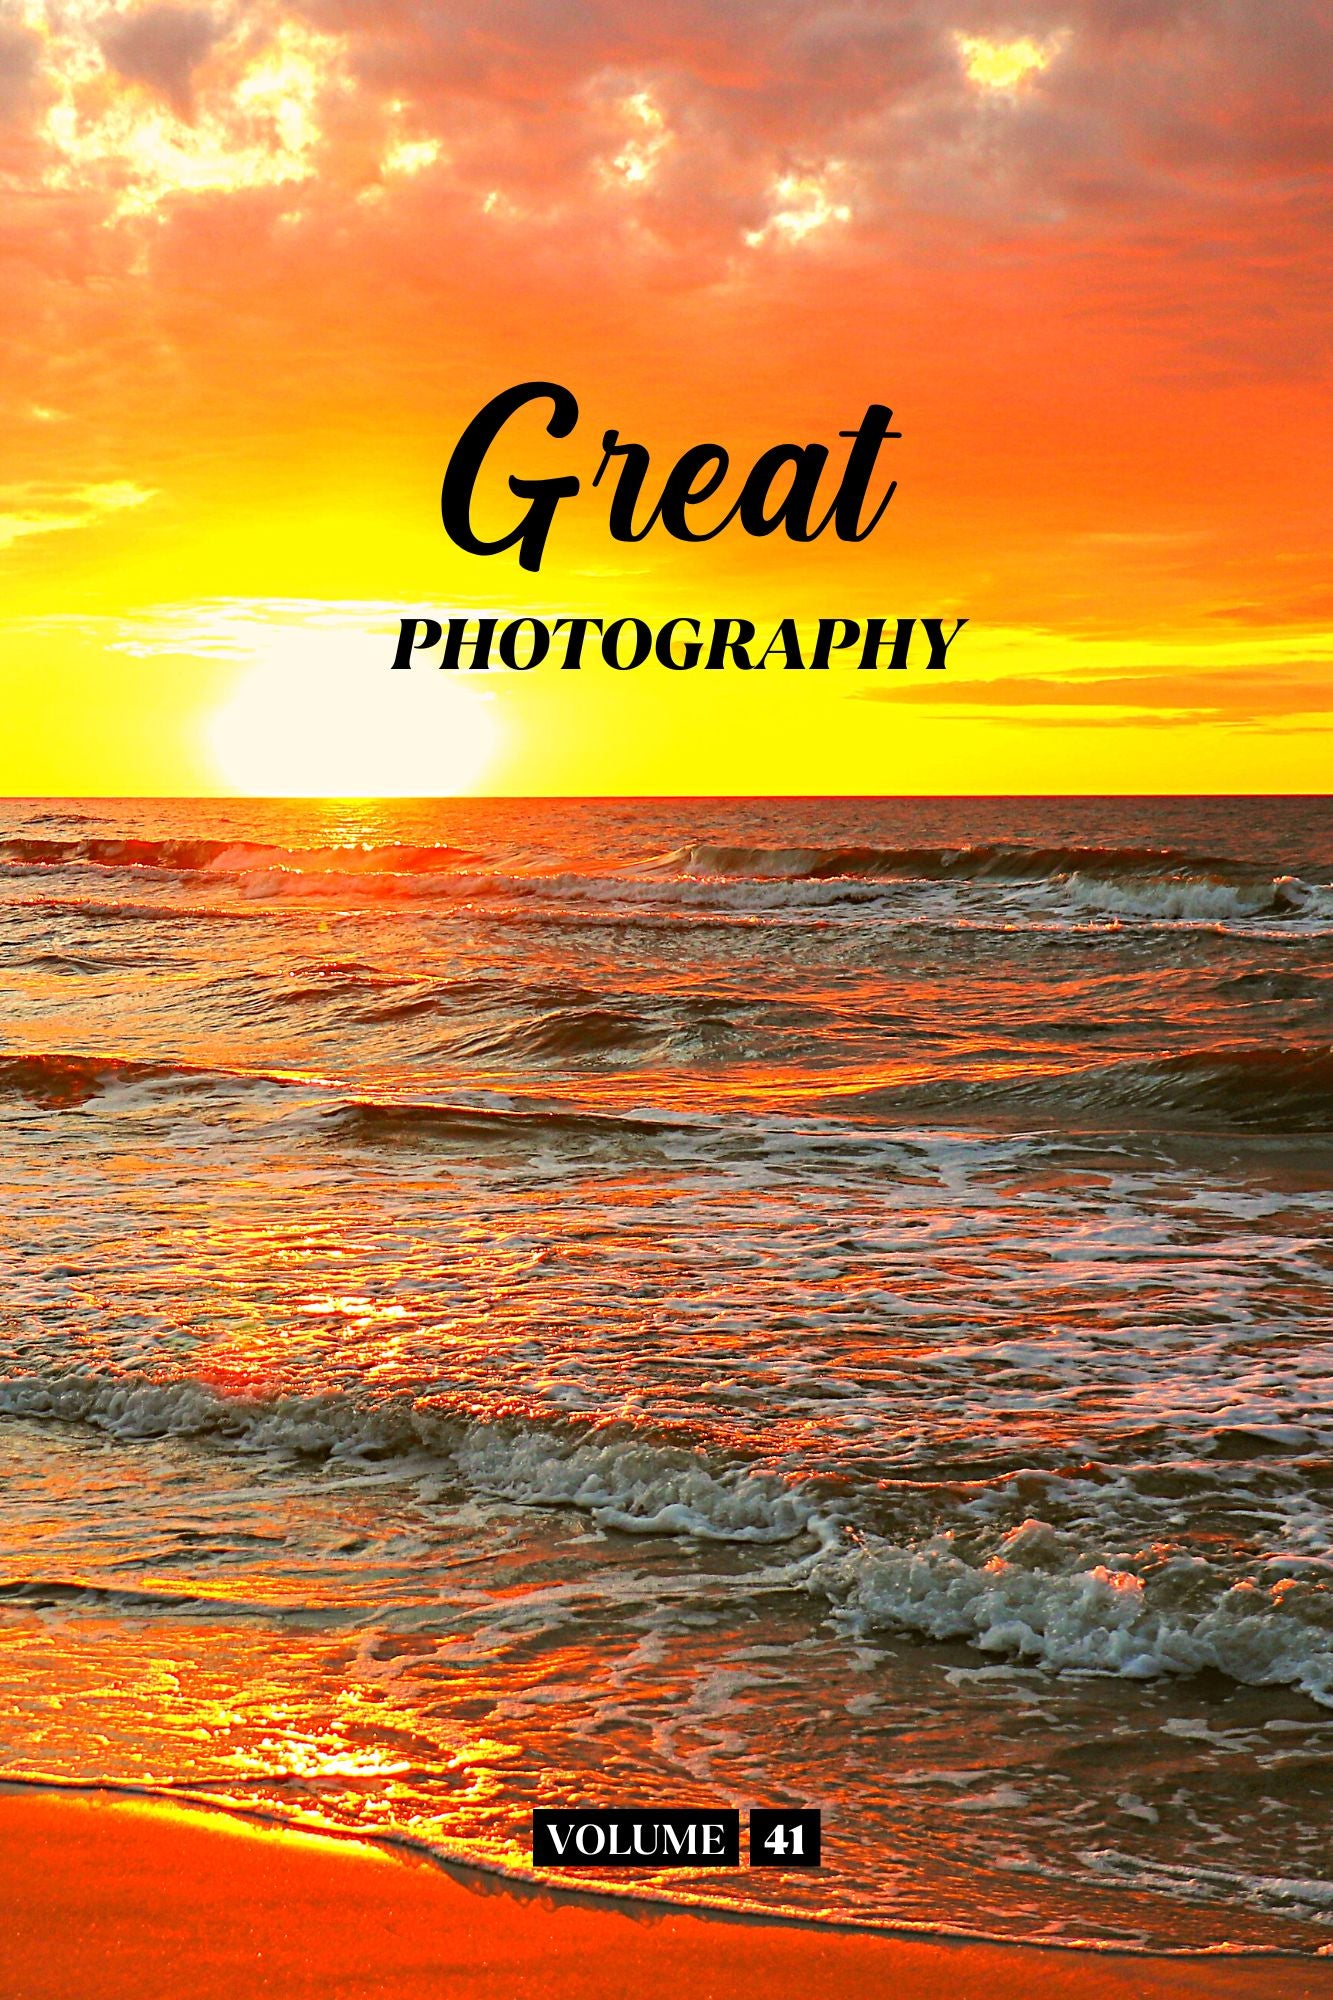 Great Photography Volume 41 (Physical Book Pre-Order)